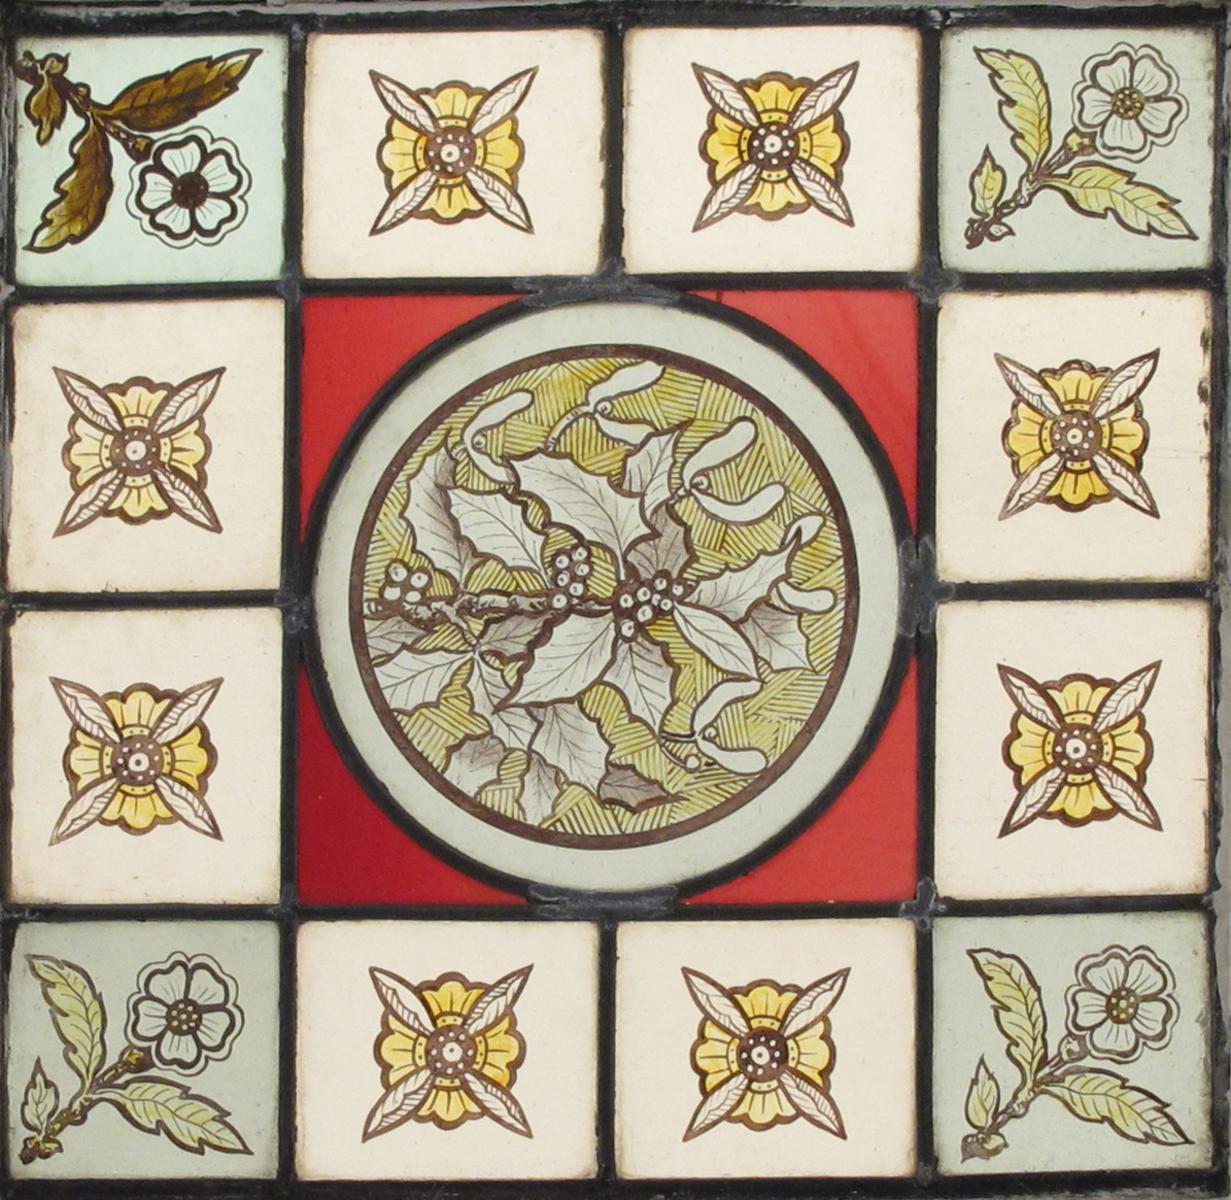 A small stained glass window, decorated with a central roundel of holly, inside panel border of